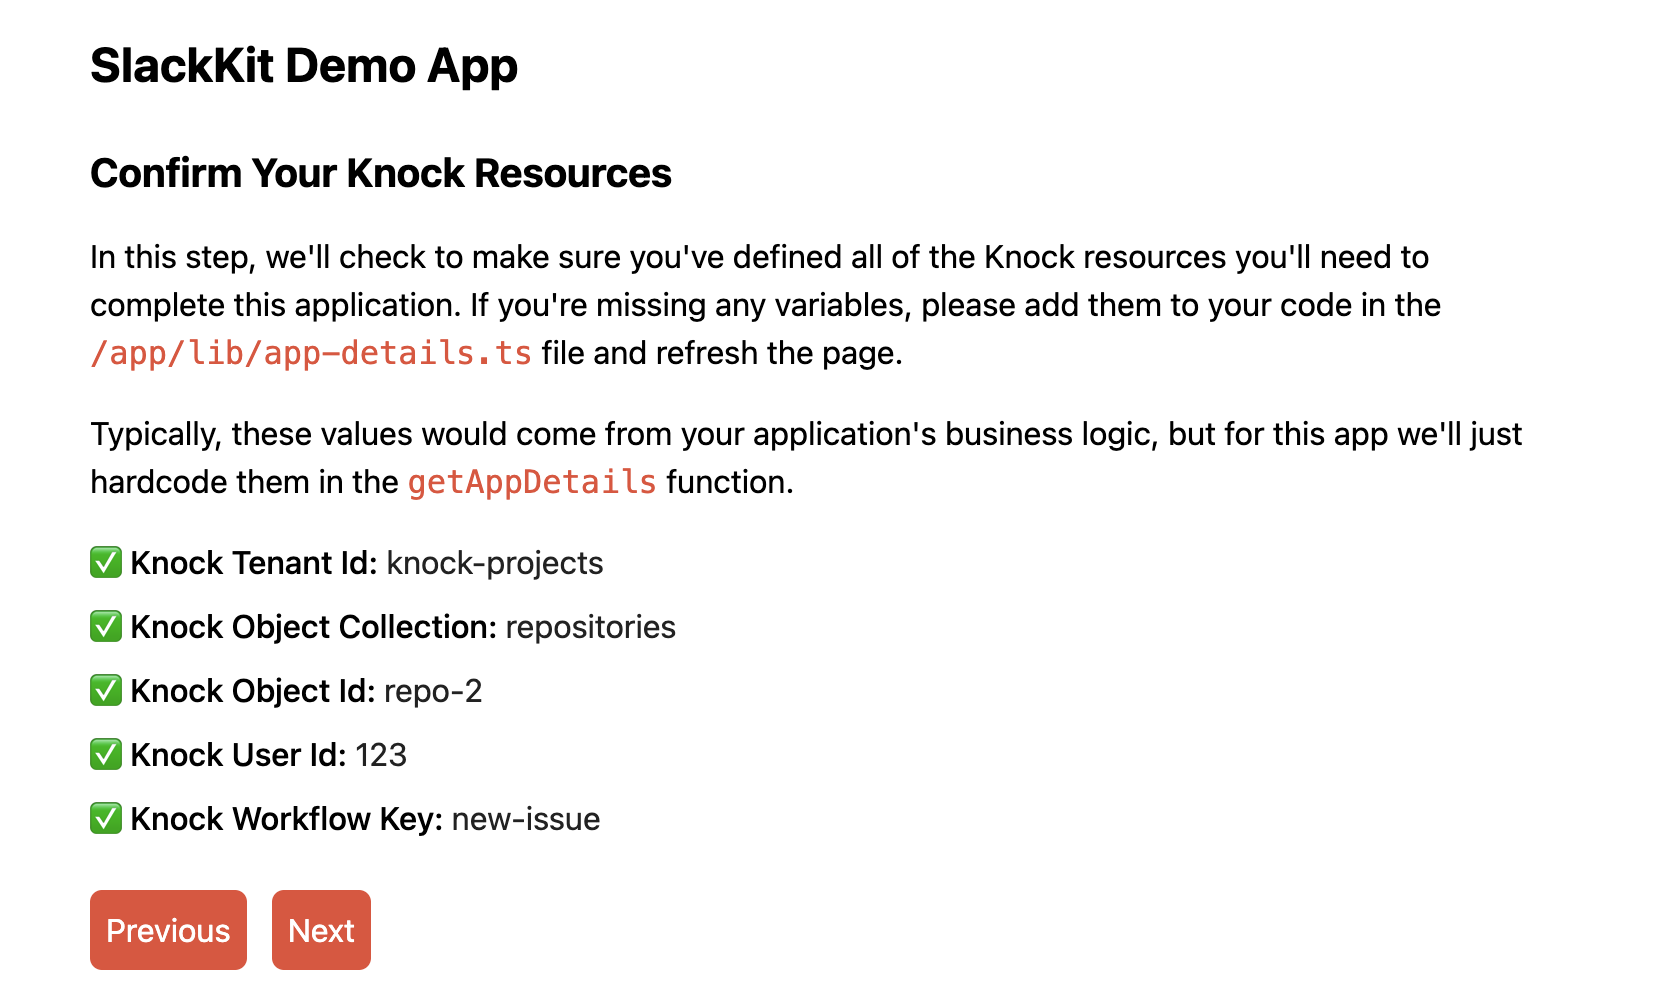 confirm Knock resources screen